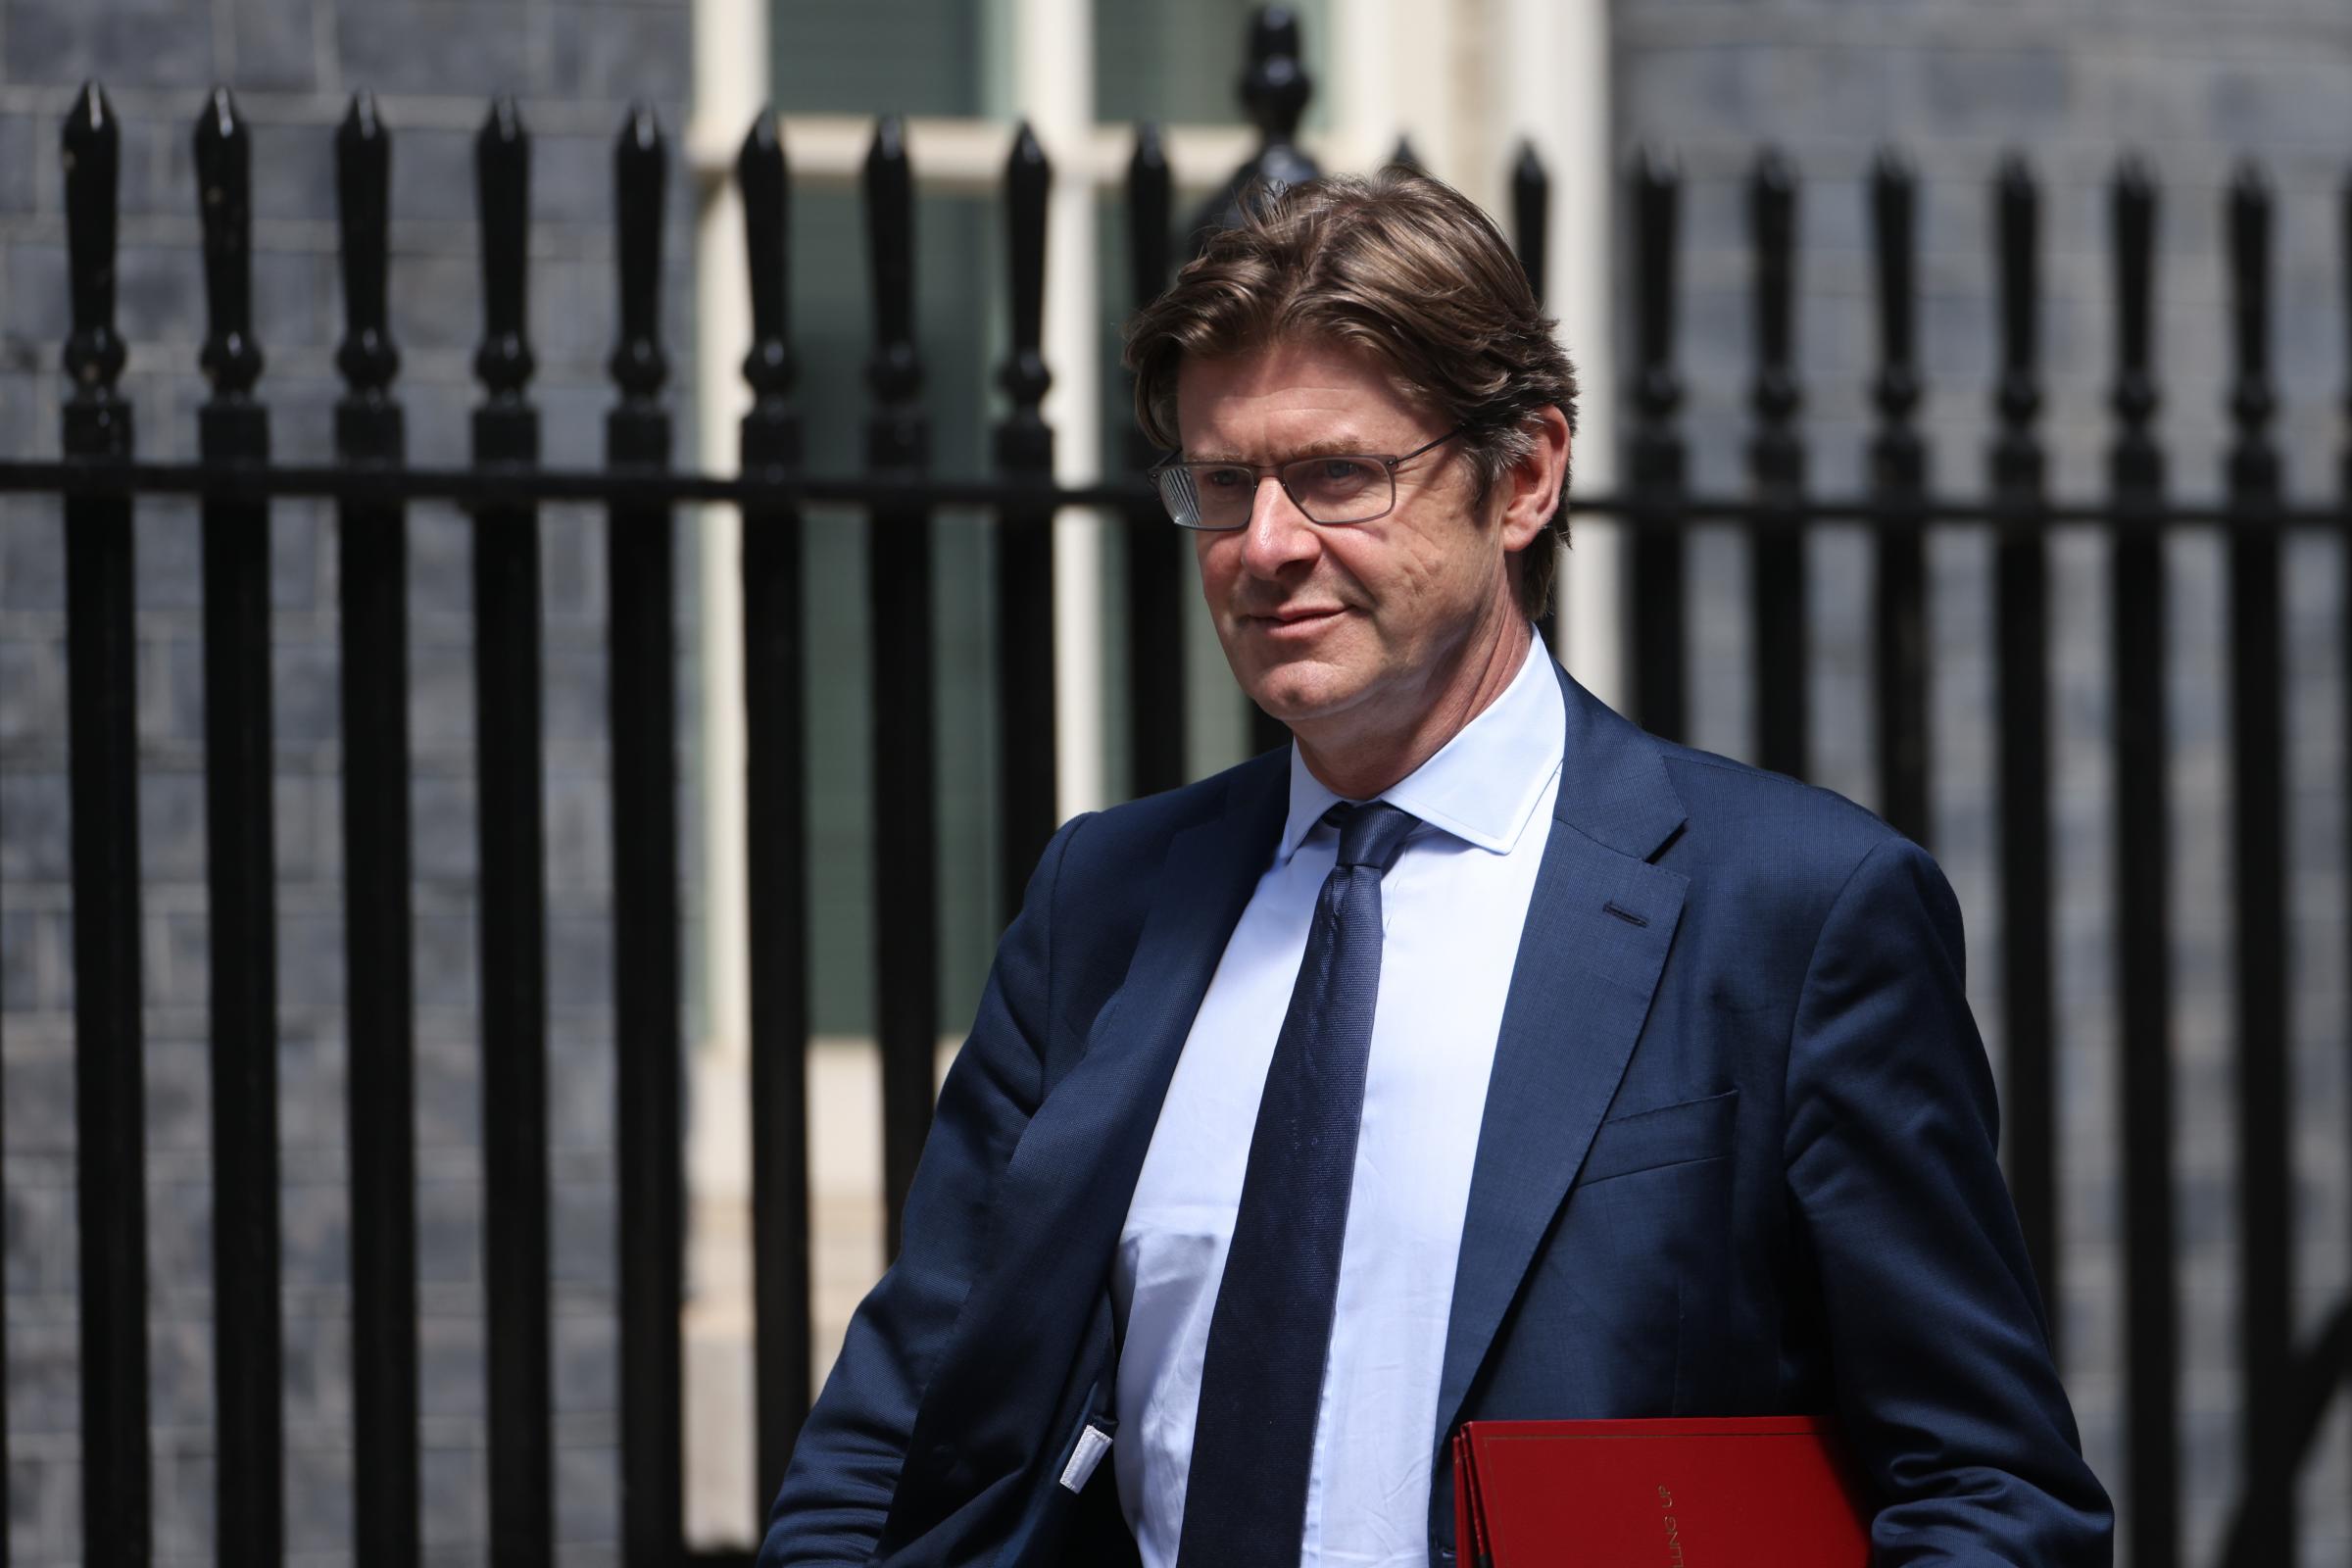 Greg Clark, the newly-appointed Levelling Up Secretary